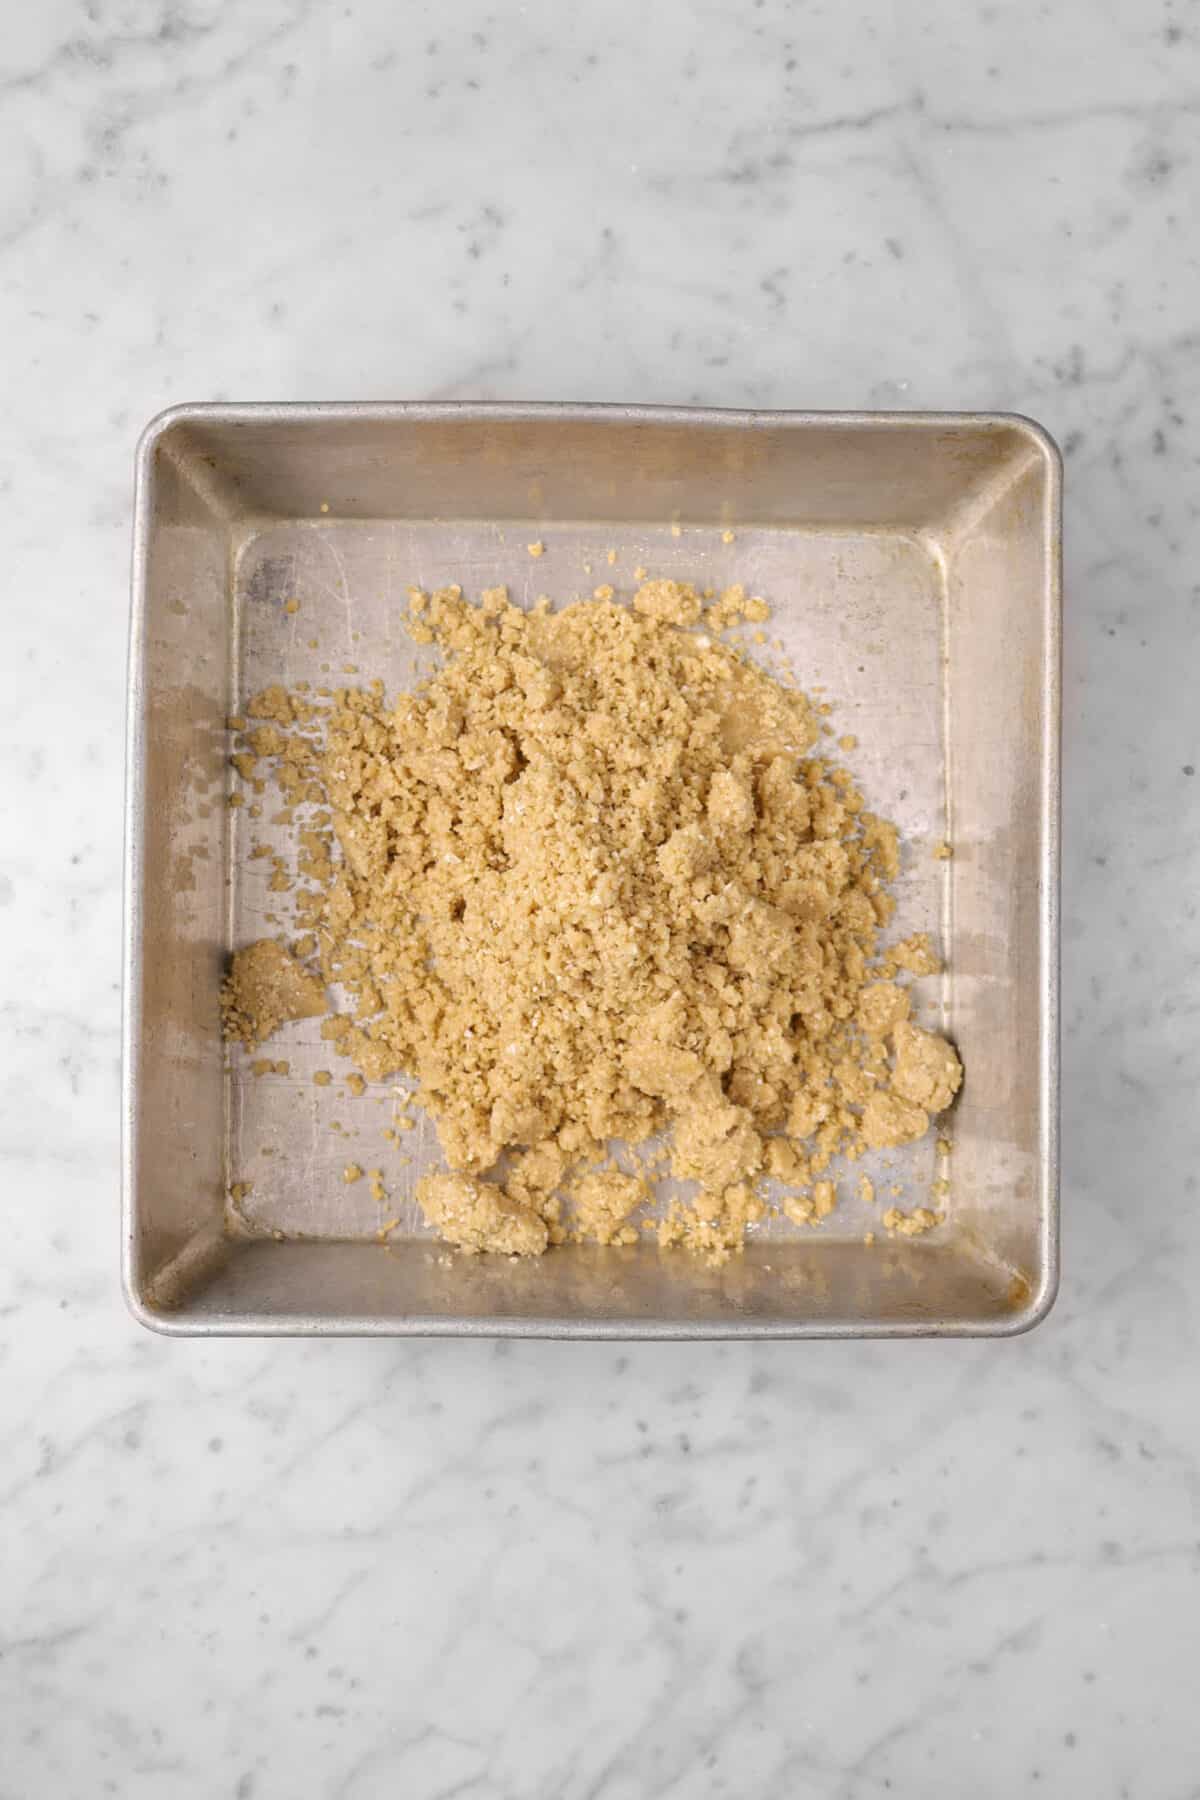 crumble mixture in a square pan